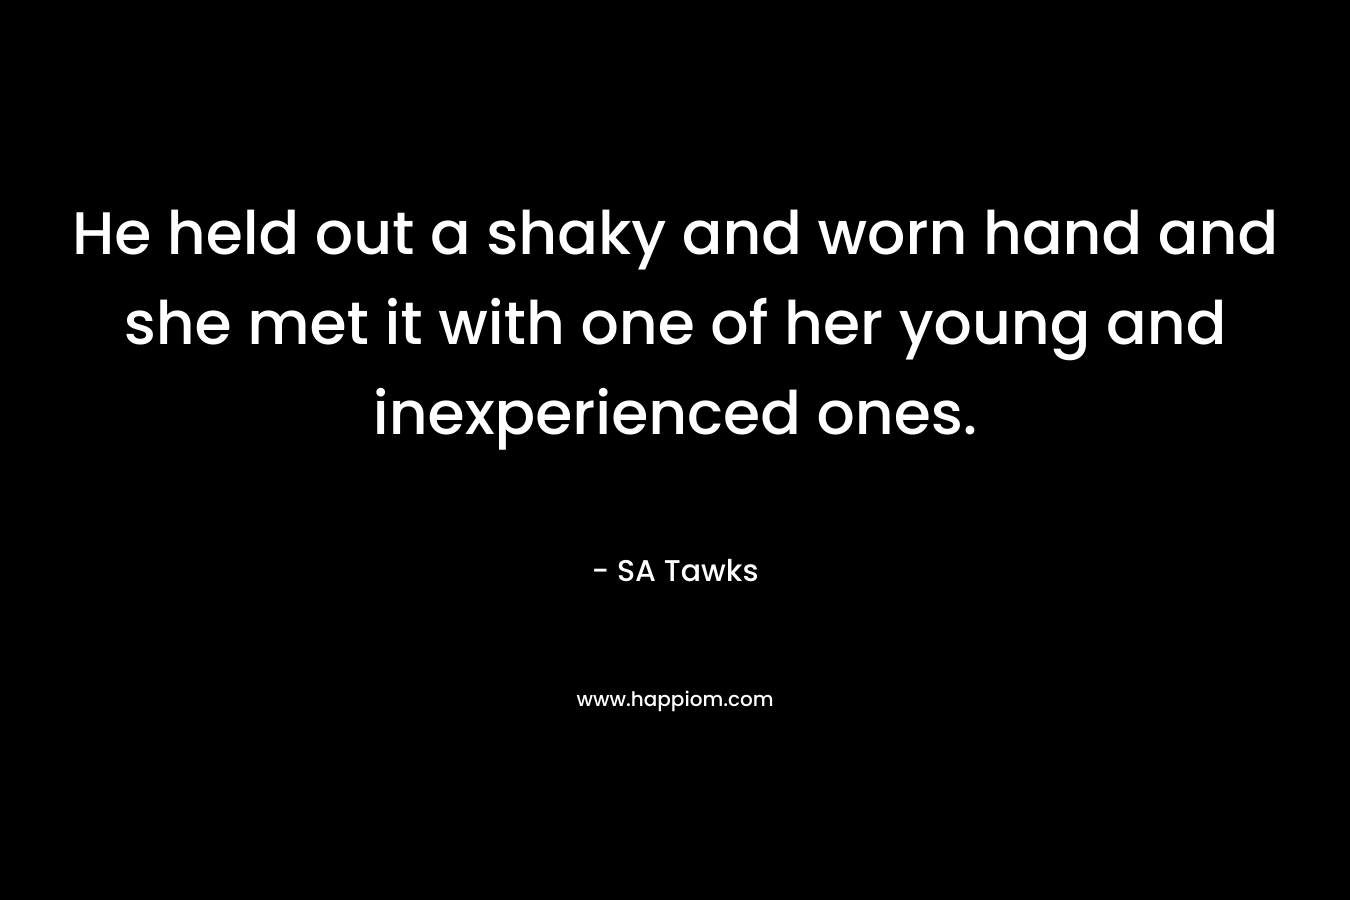 He held out a shaky and worn hand and she met it with one of her young and inexperienced ones. – SA Tawks